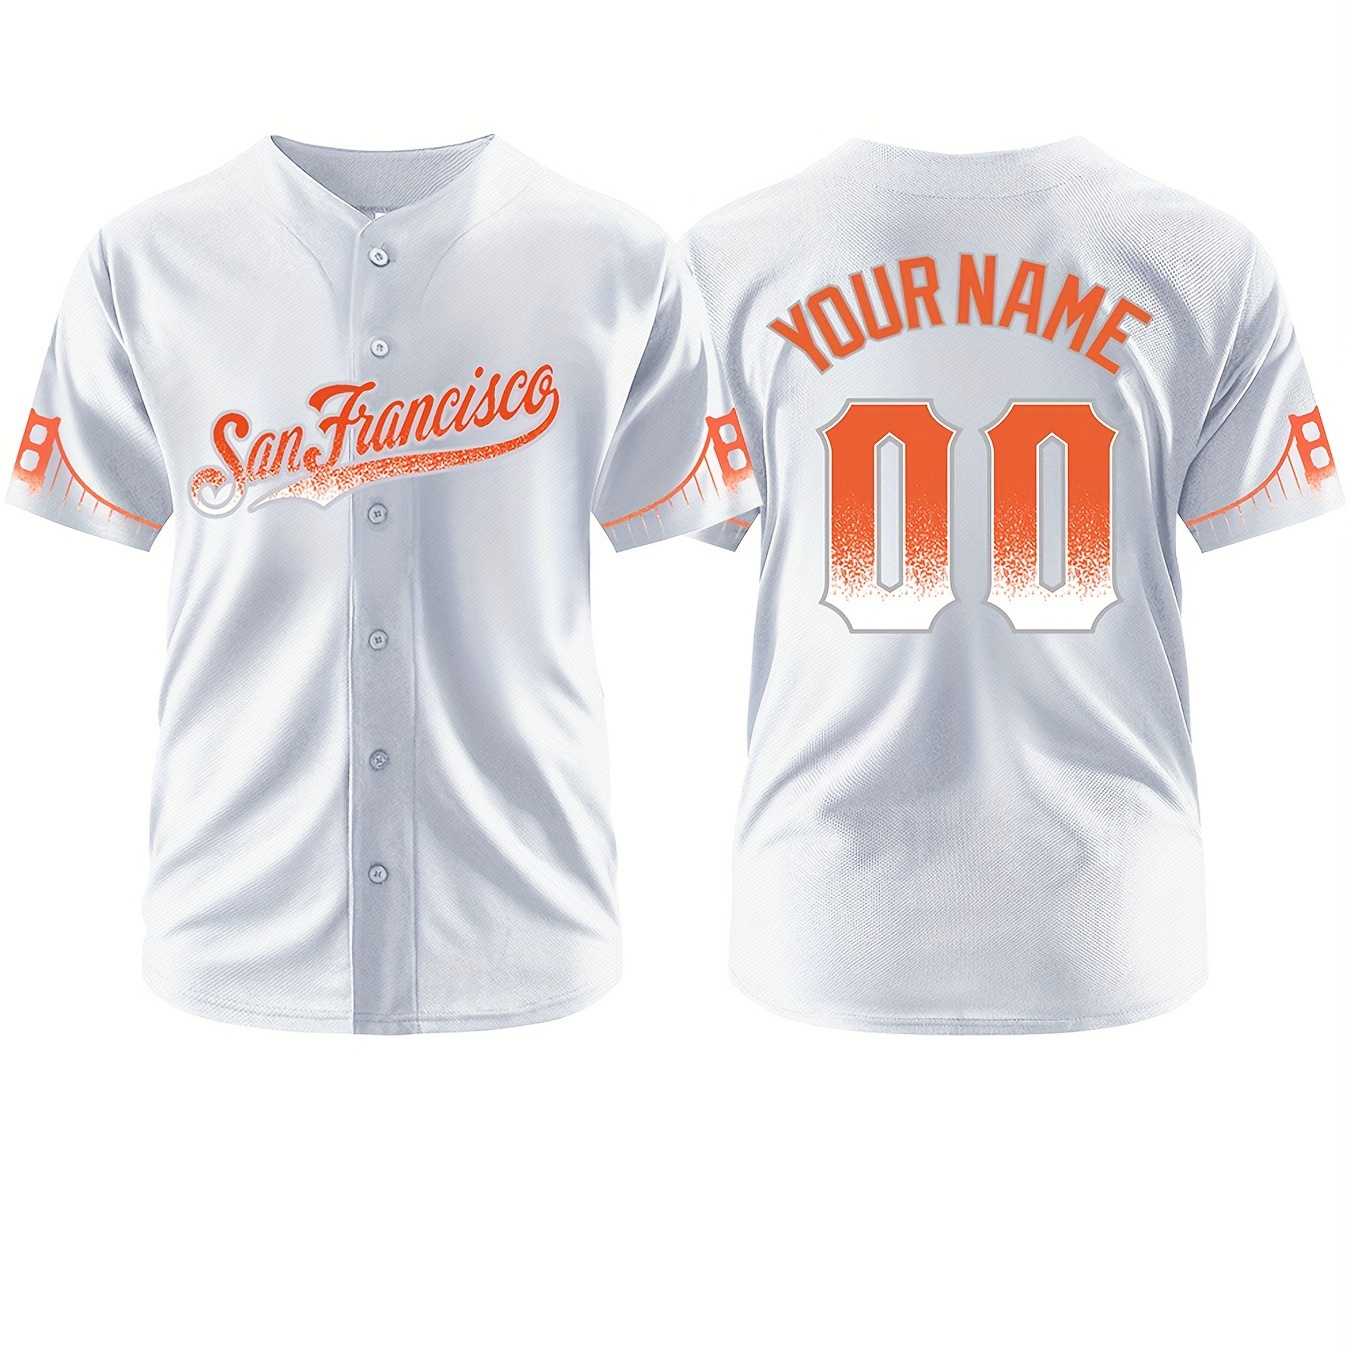 

Customized Name And Number, Men's Short Sleeve V-neck "san Francisco" Baseball Jersey, Comfy Top For Training And Competition